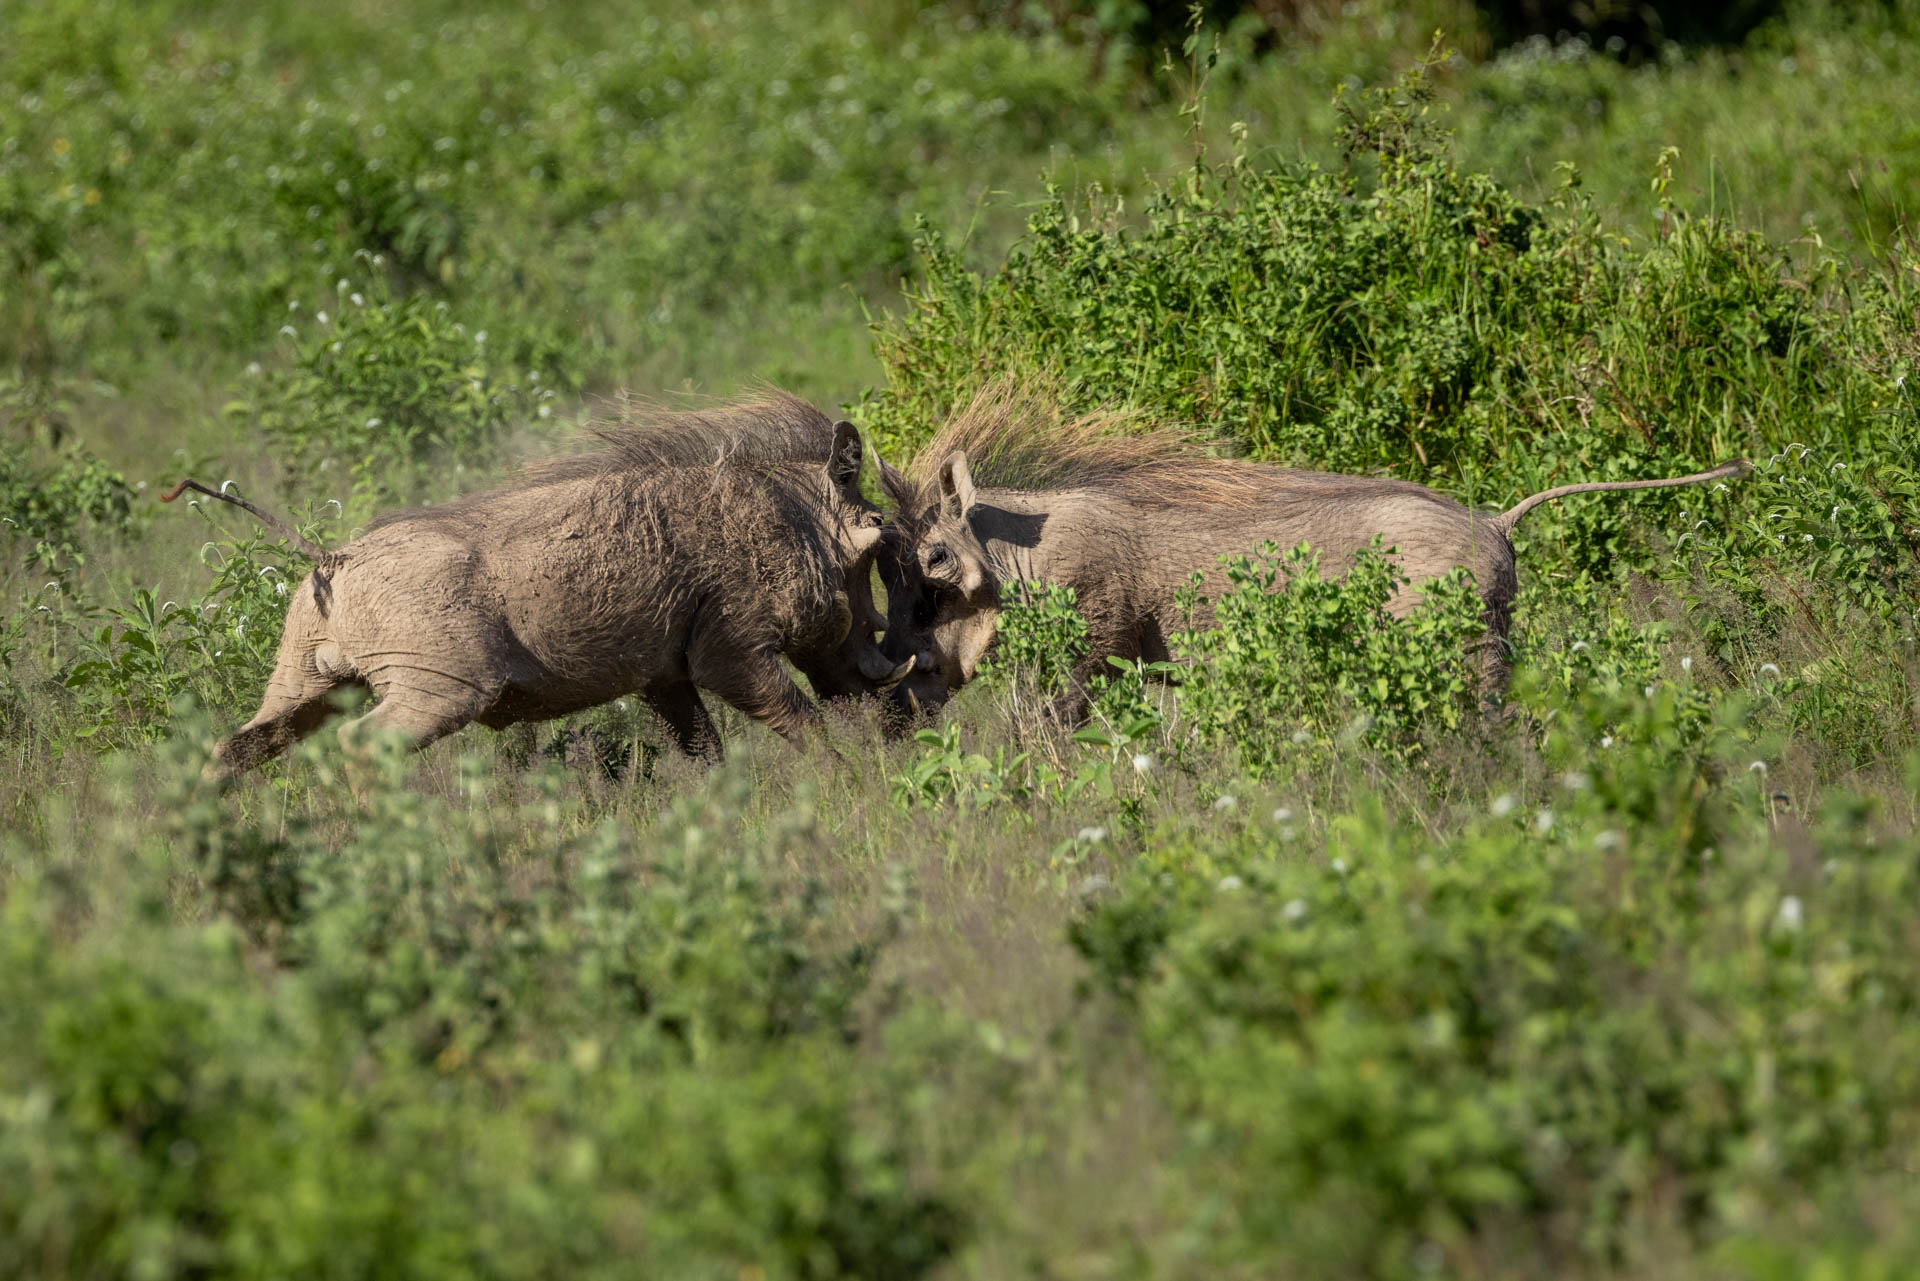 Above: Two warthogs battle it out 